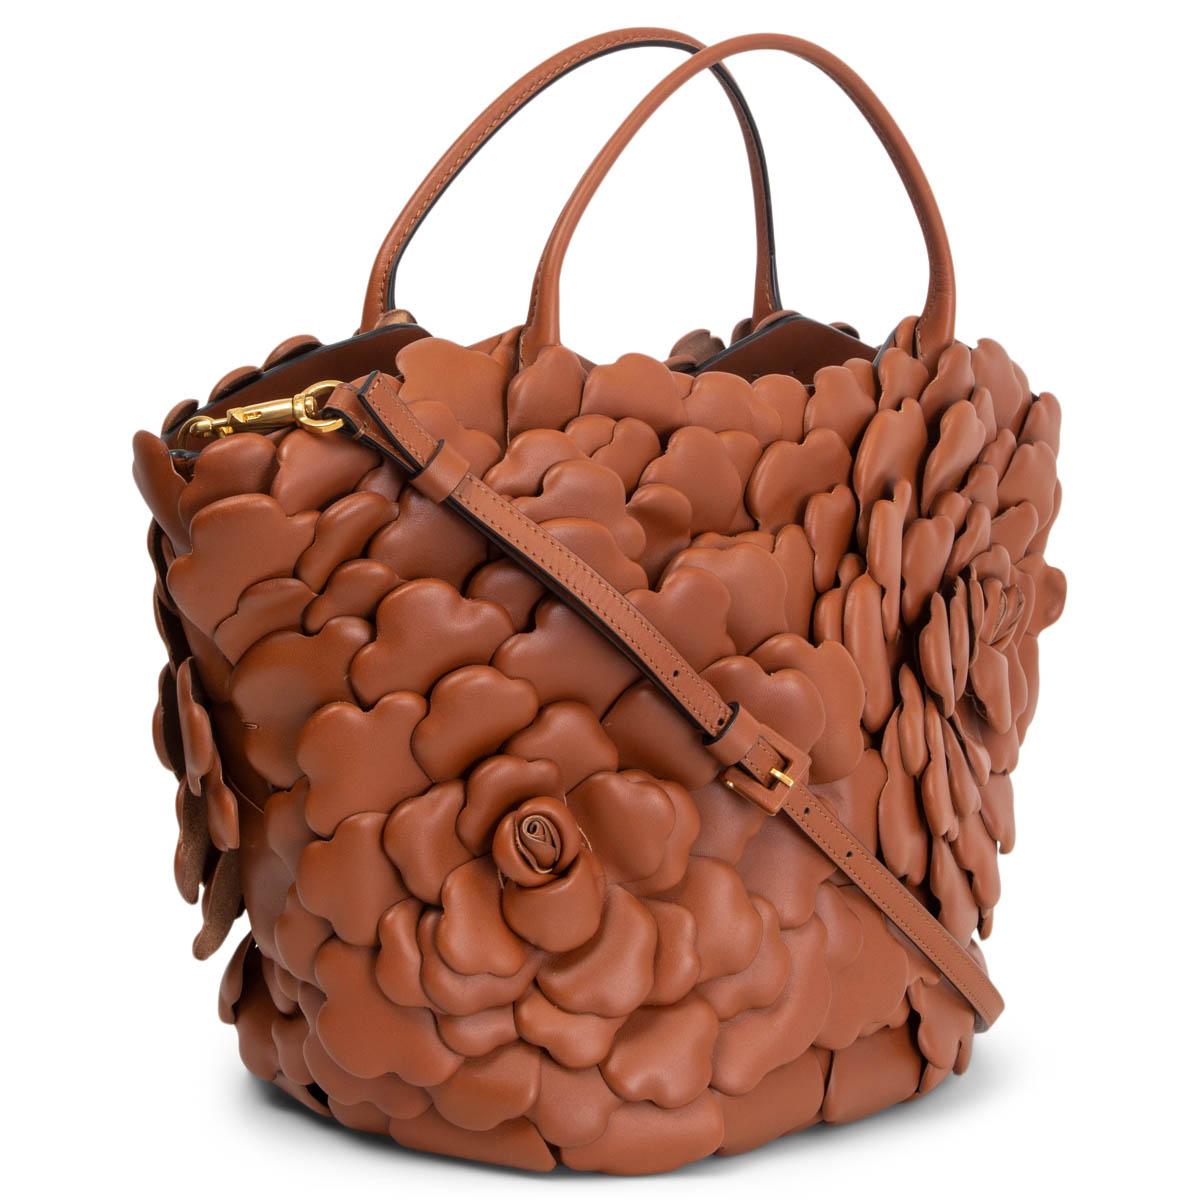 100% authentic Valentino Garavani 03 Rose Edition Atelier Small Tote Bag in cognac brown nappa leather embellished by leather petals creating a 3D rose detail. Comes with an adjustable strap with two buckles. Open top, strap fastening got removed.